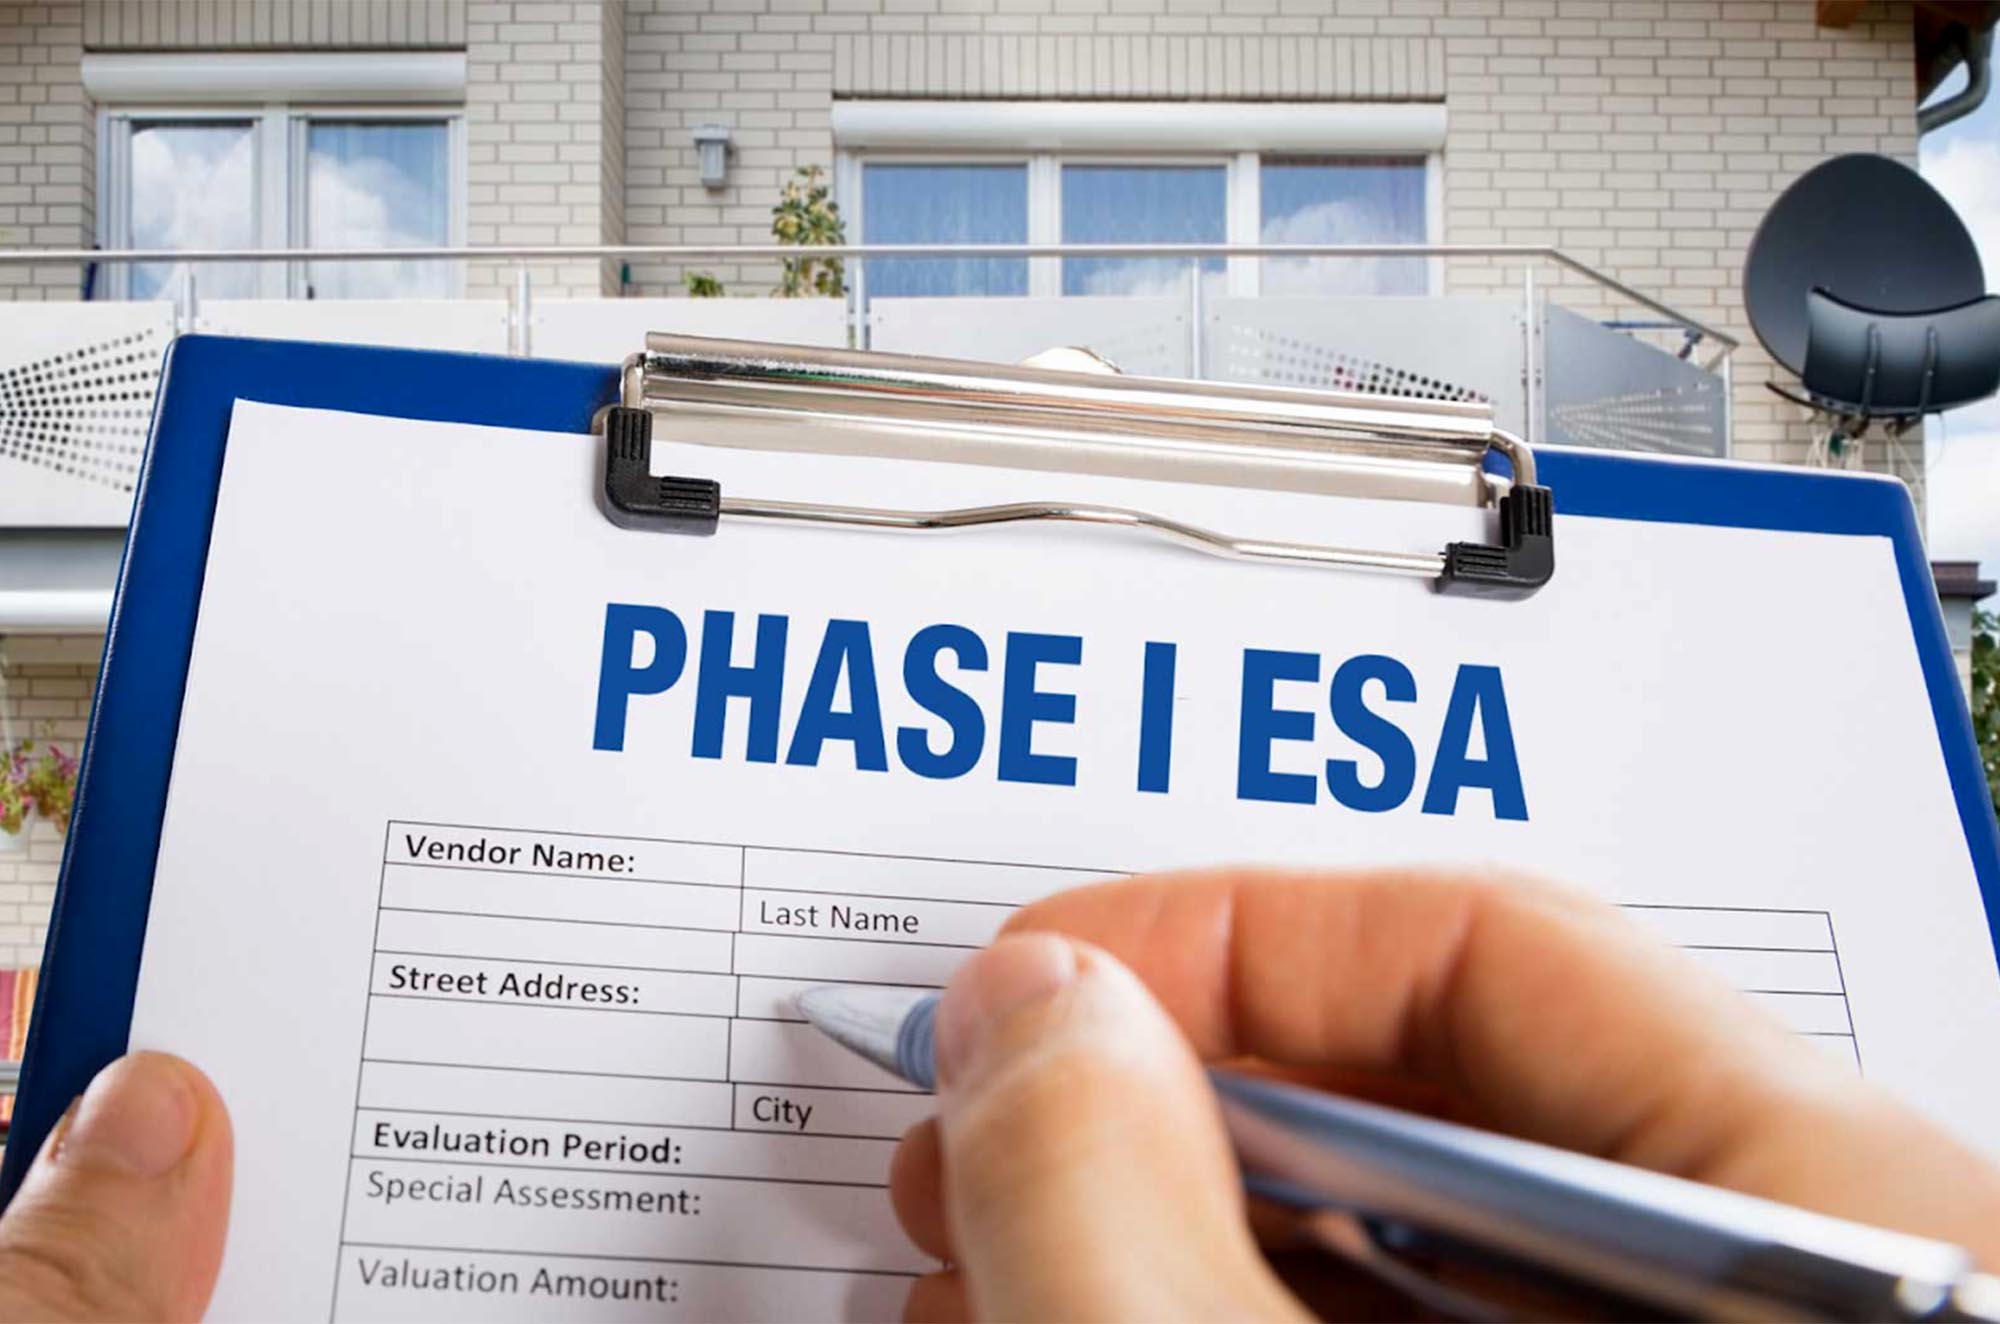 Phase 1 ESA paperwork being filled out